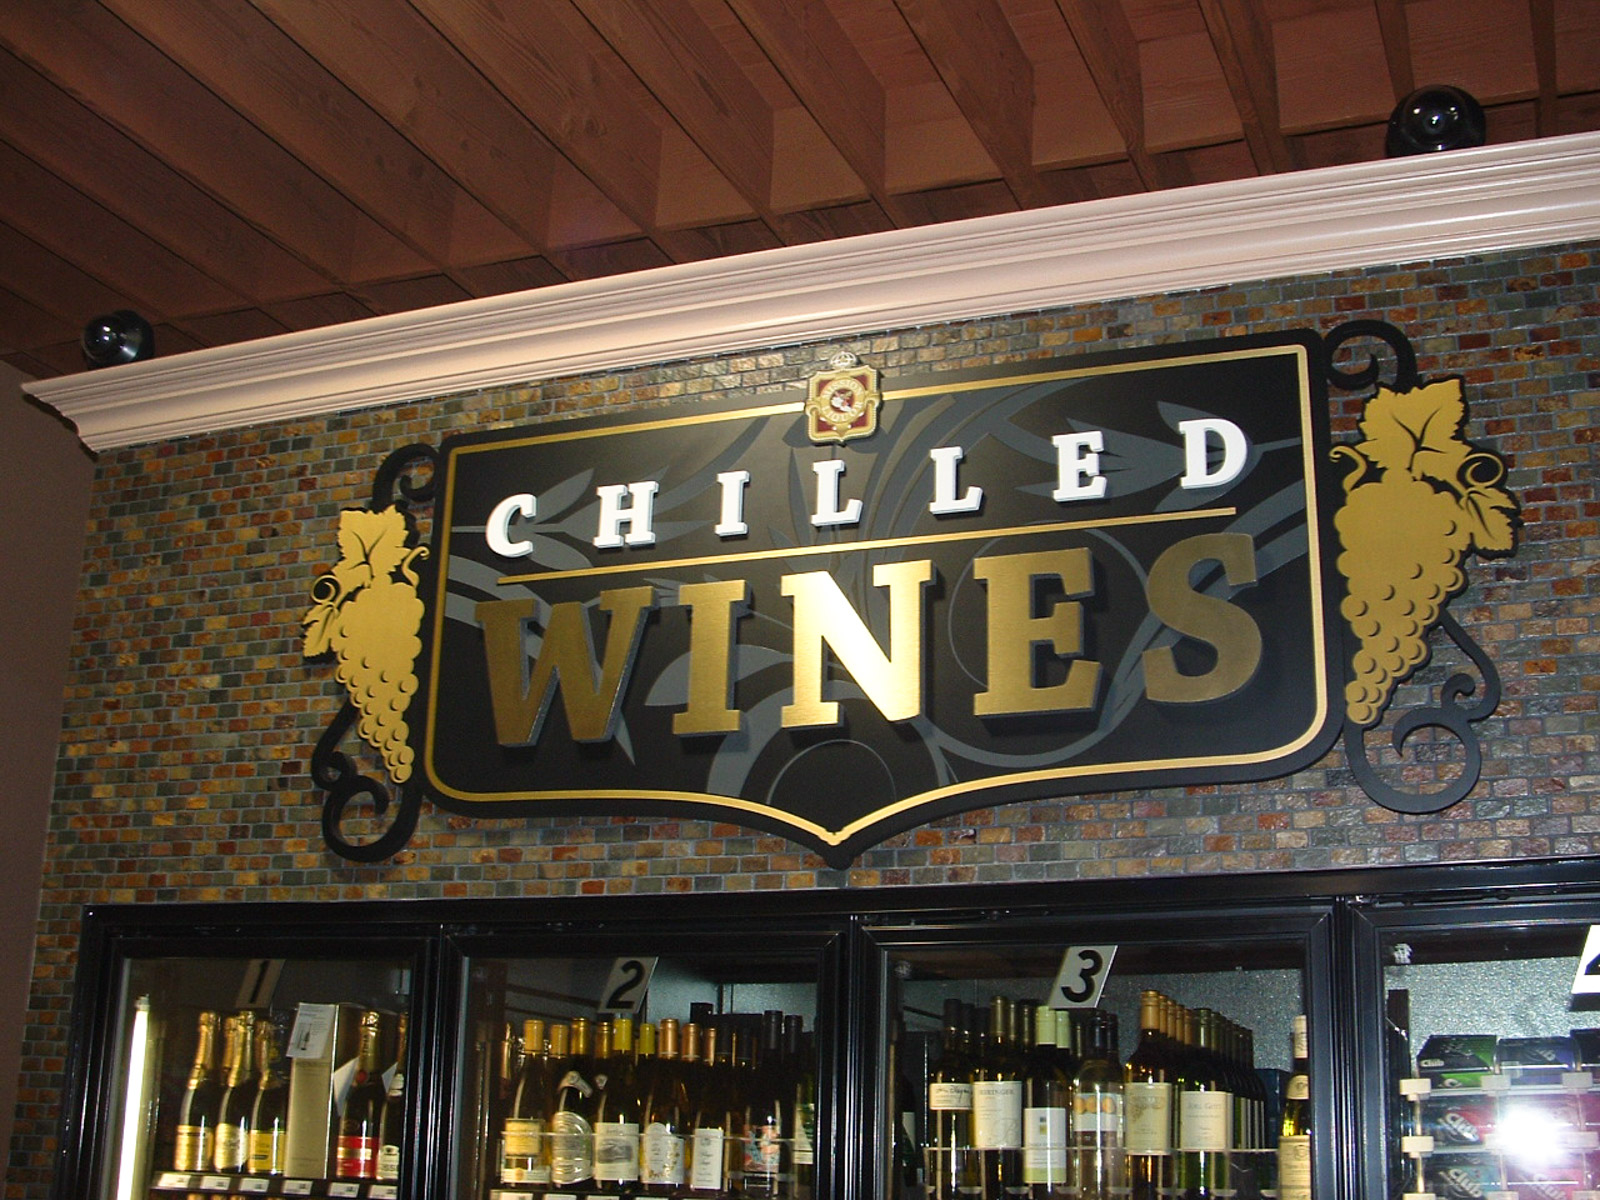 Mission Wine & Spirits - Chilled Wines Sign